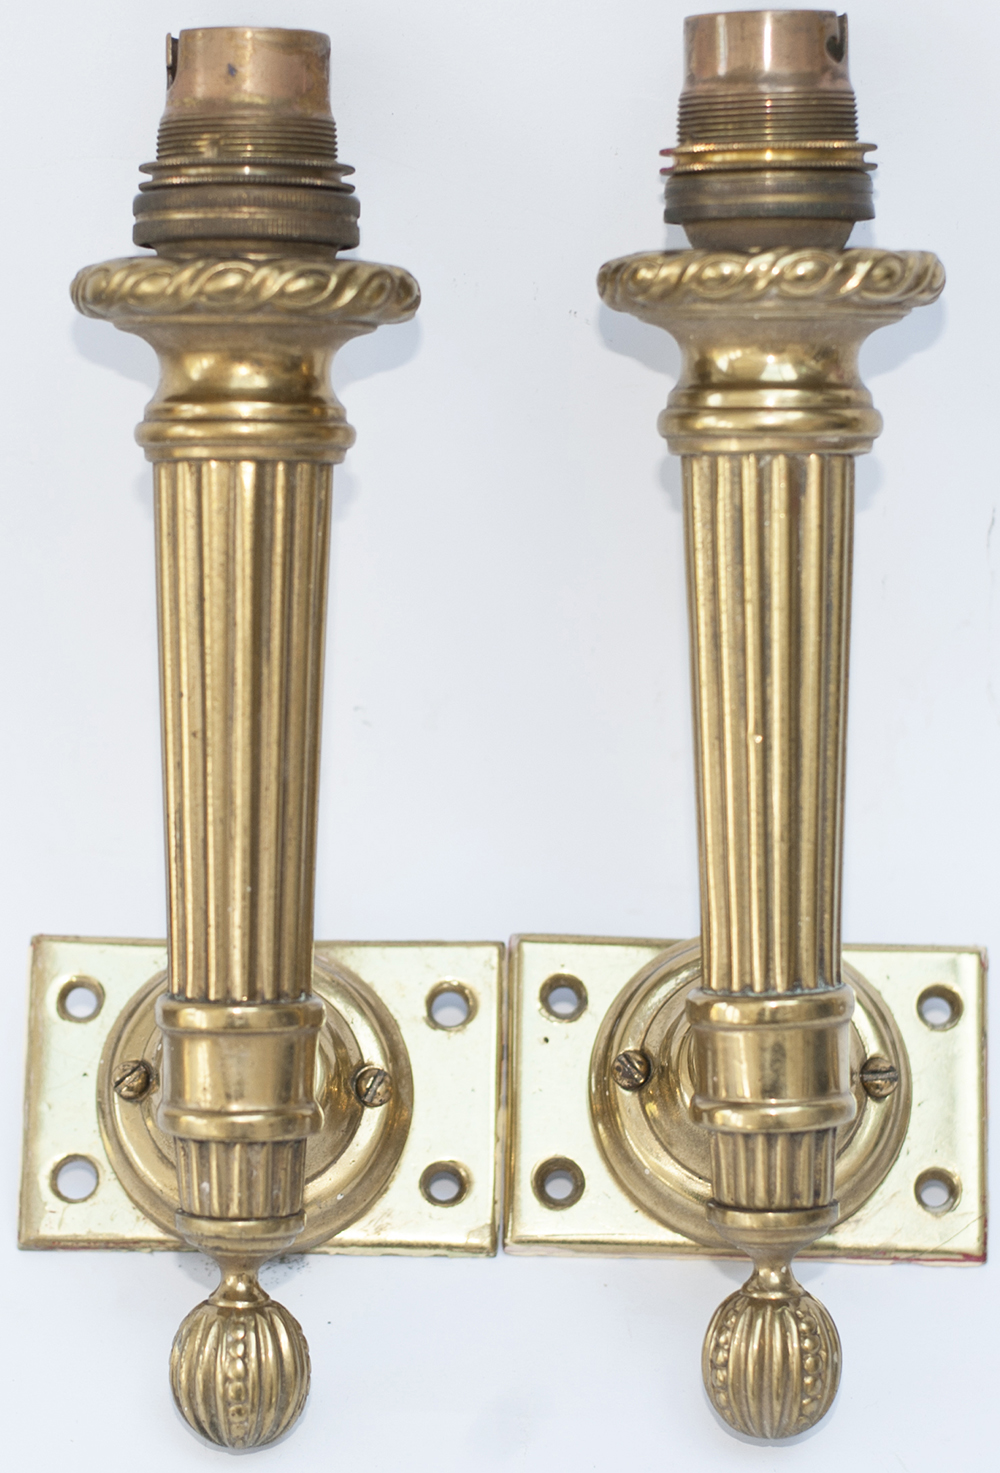 Pullman carriage lamps, an identical pair of 1st class wall mounted examples, from one of the